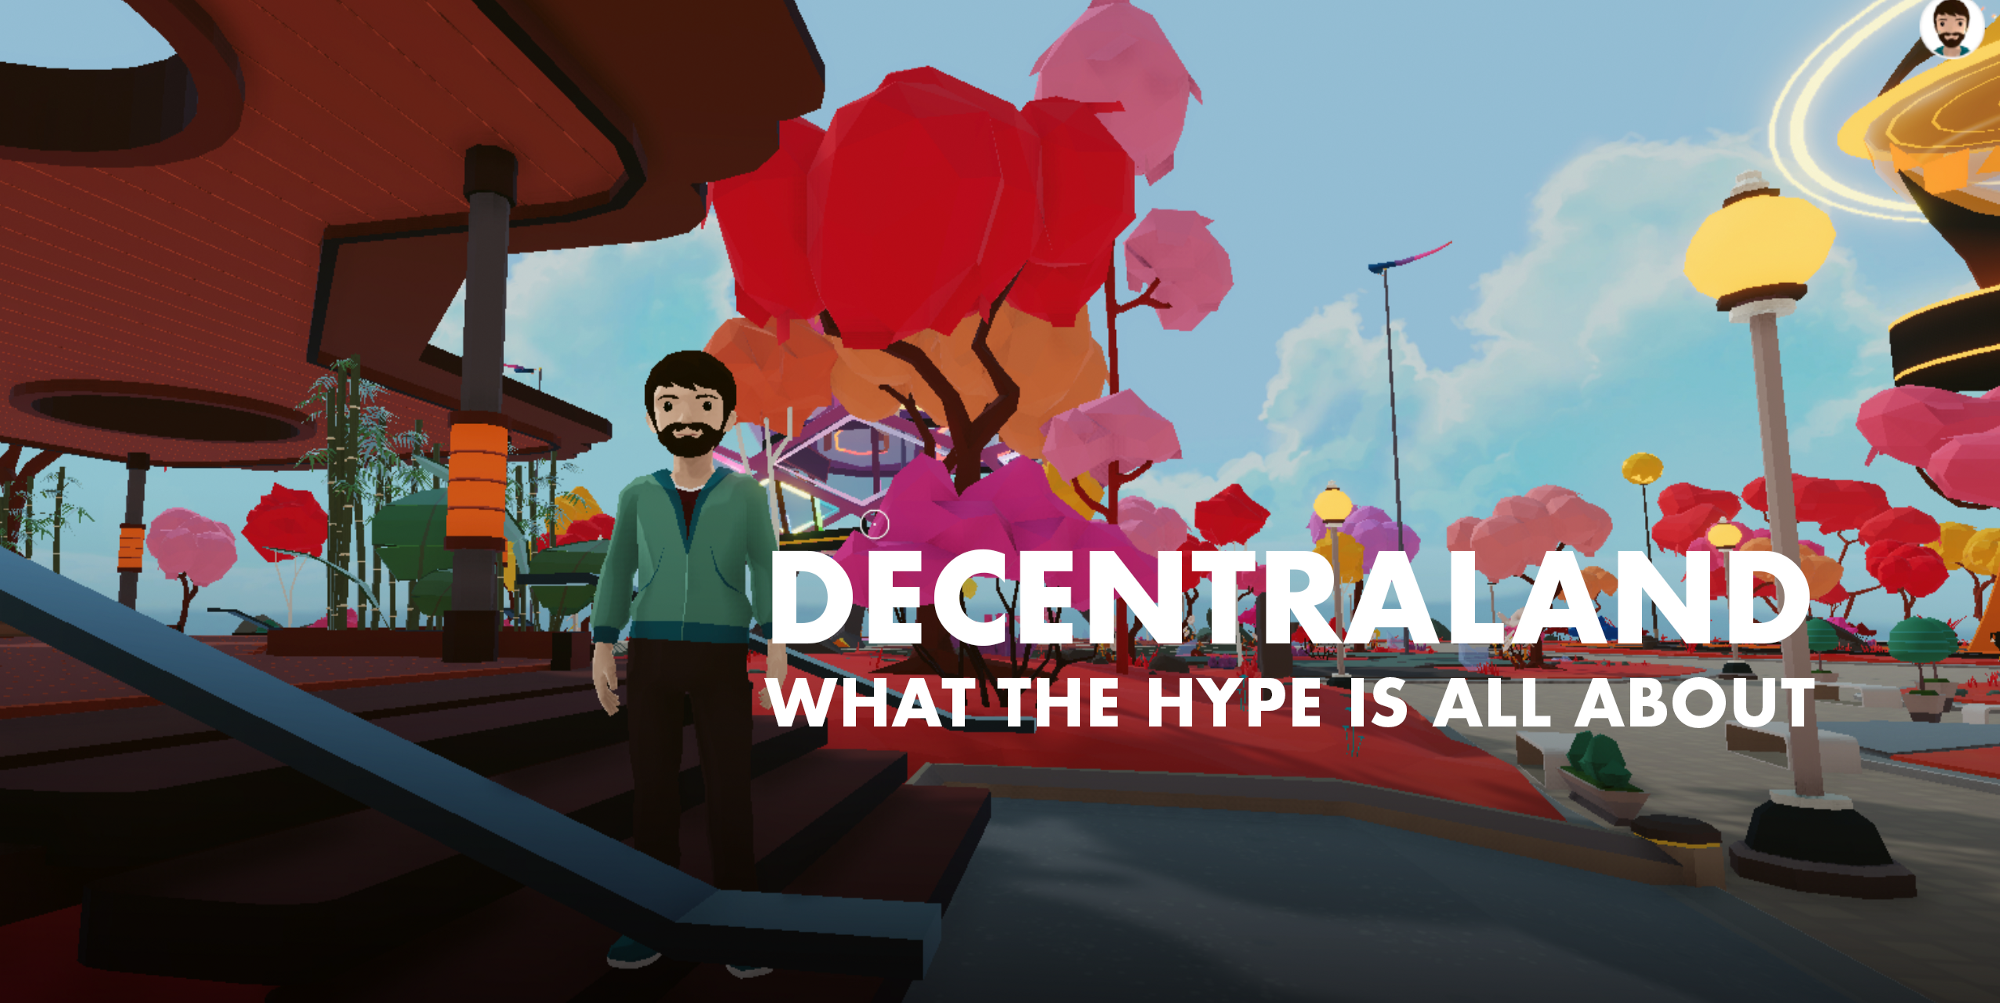 Here's what I discovered after spending a day in Decentraland